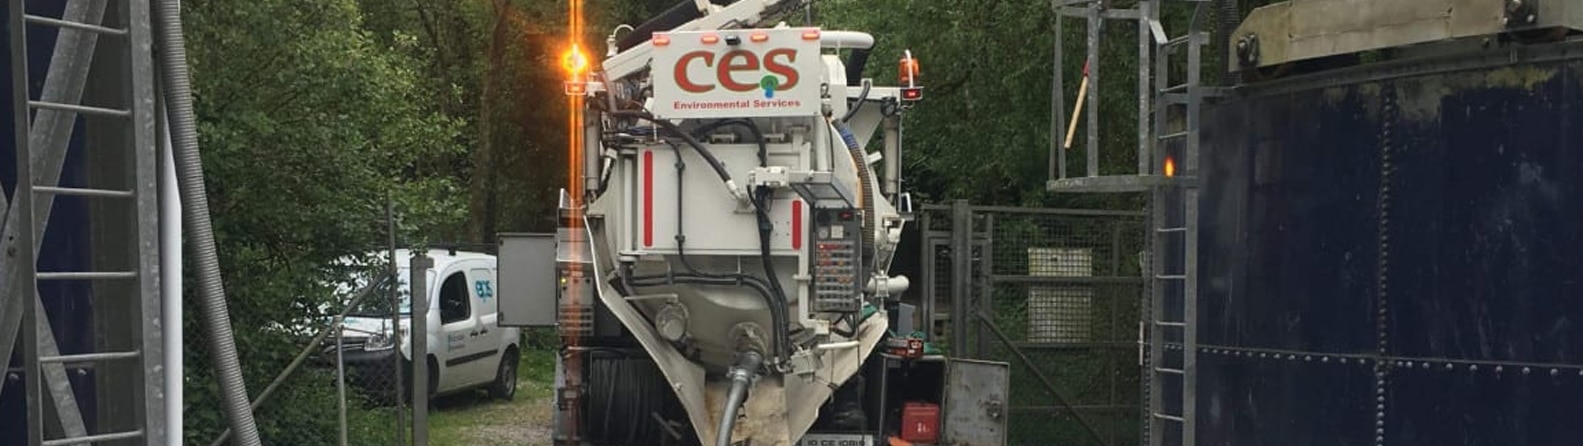 image of CES Truck emptying an industrial Tank